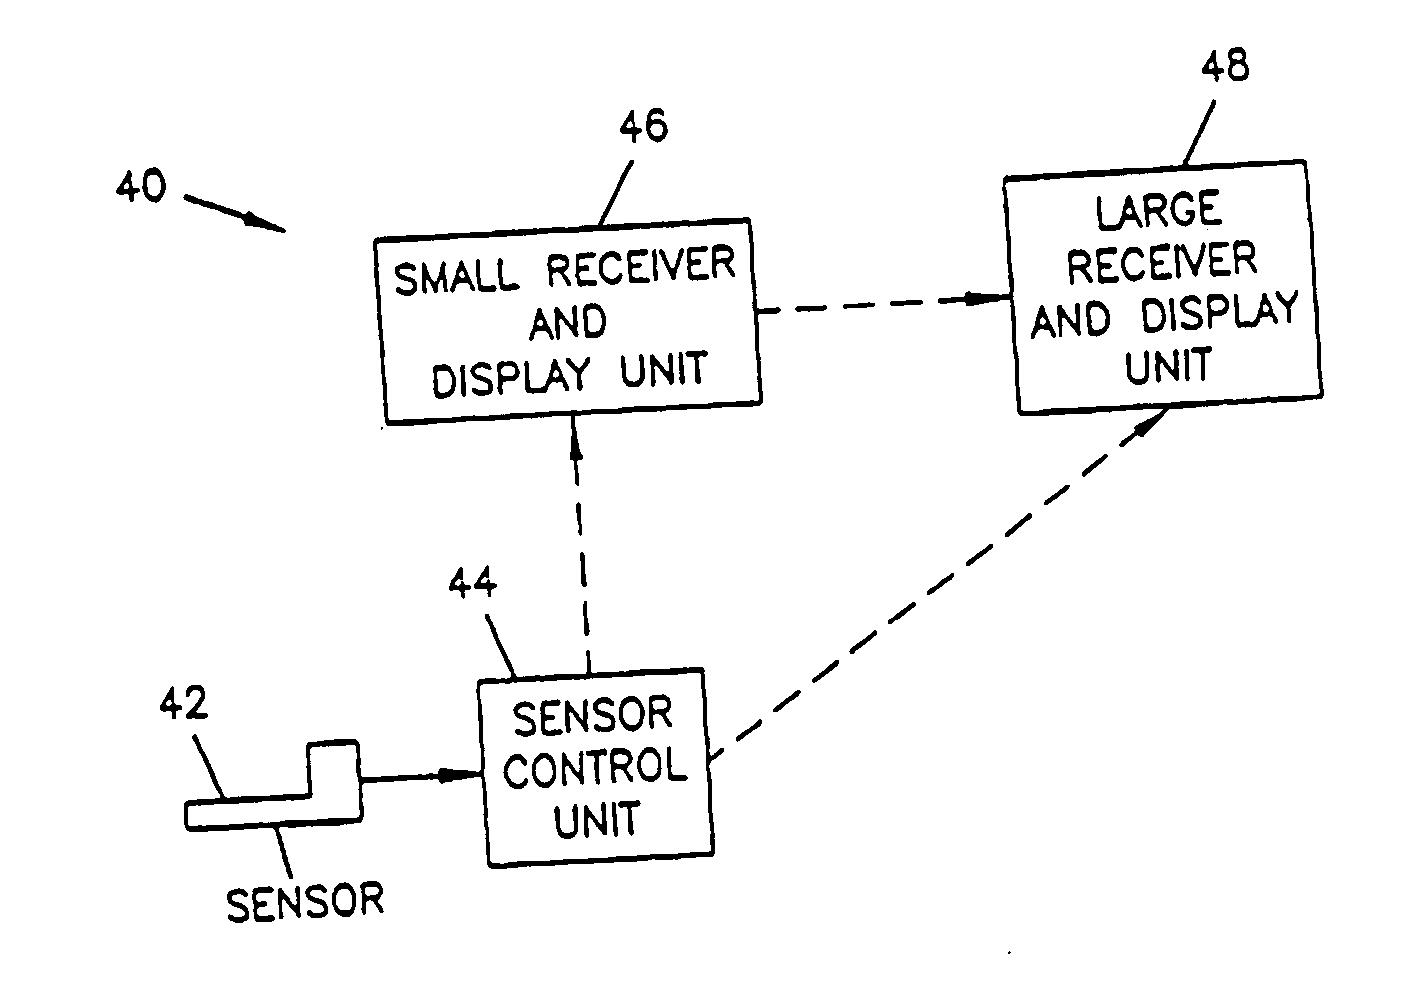 Analyte monitoring device and methods of use